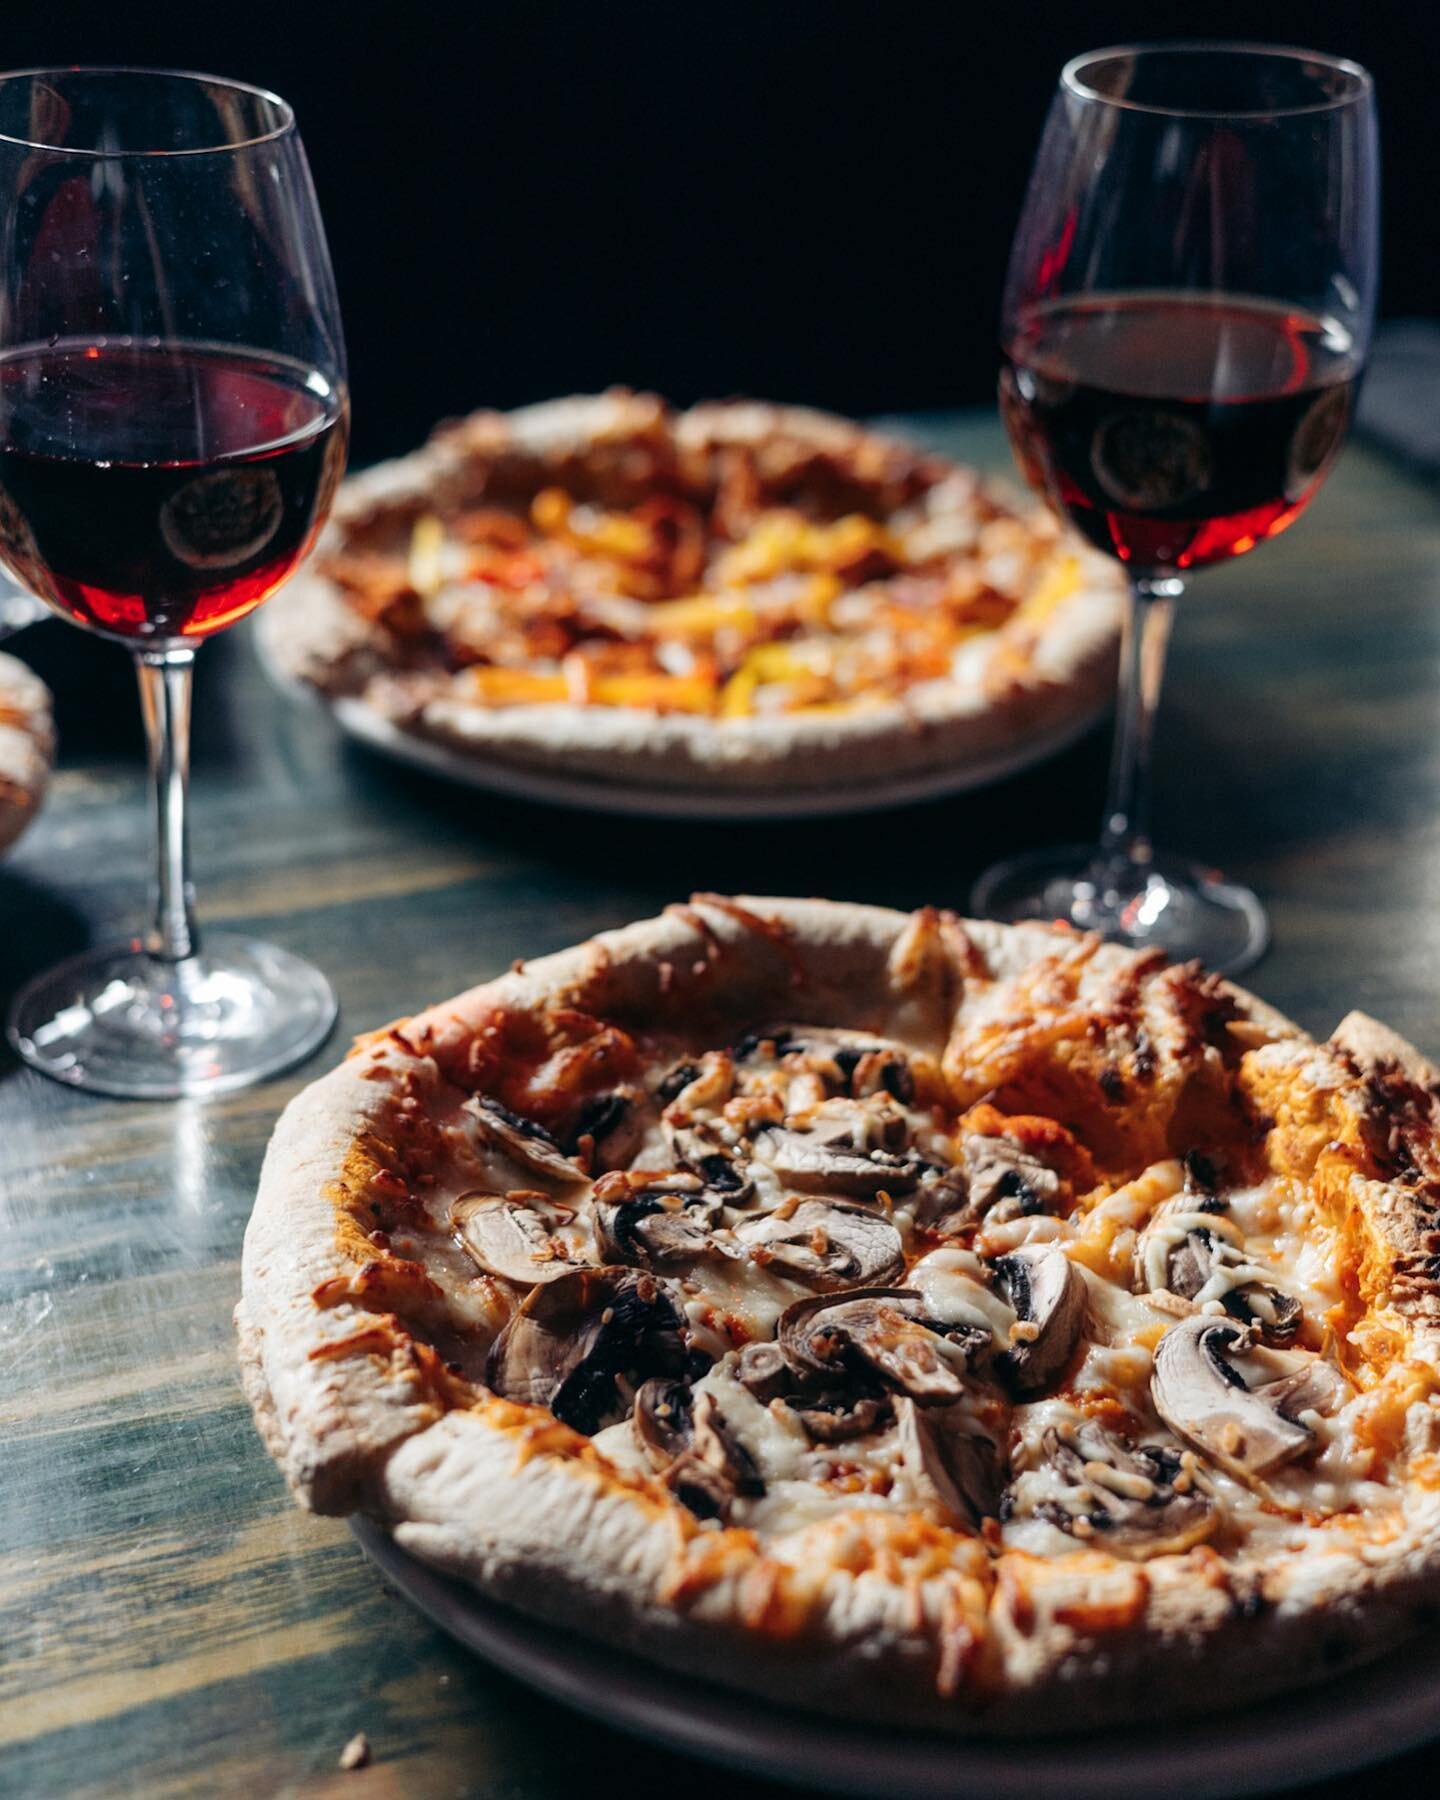 Pizza &amp; wine time 🍕❤️

Join us at La Bocca for our mid-week Spring Specials Menus! 

Come and enjoy: 
&bull; 3 Smalls Plates for $40
&bull; 2 Pastas or Pizza &amp; a Bottle of Wine for $60 

Some restrictions apply; available Monday - Friday, 12